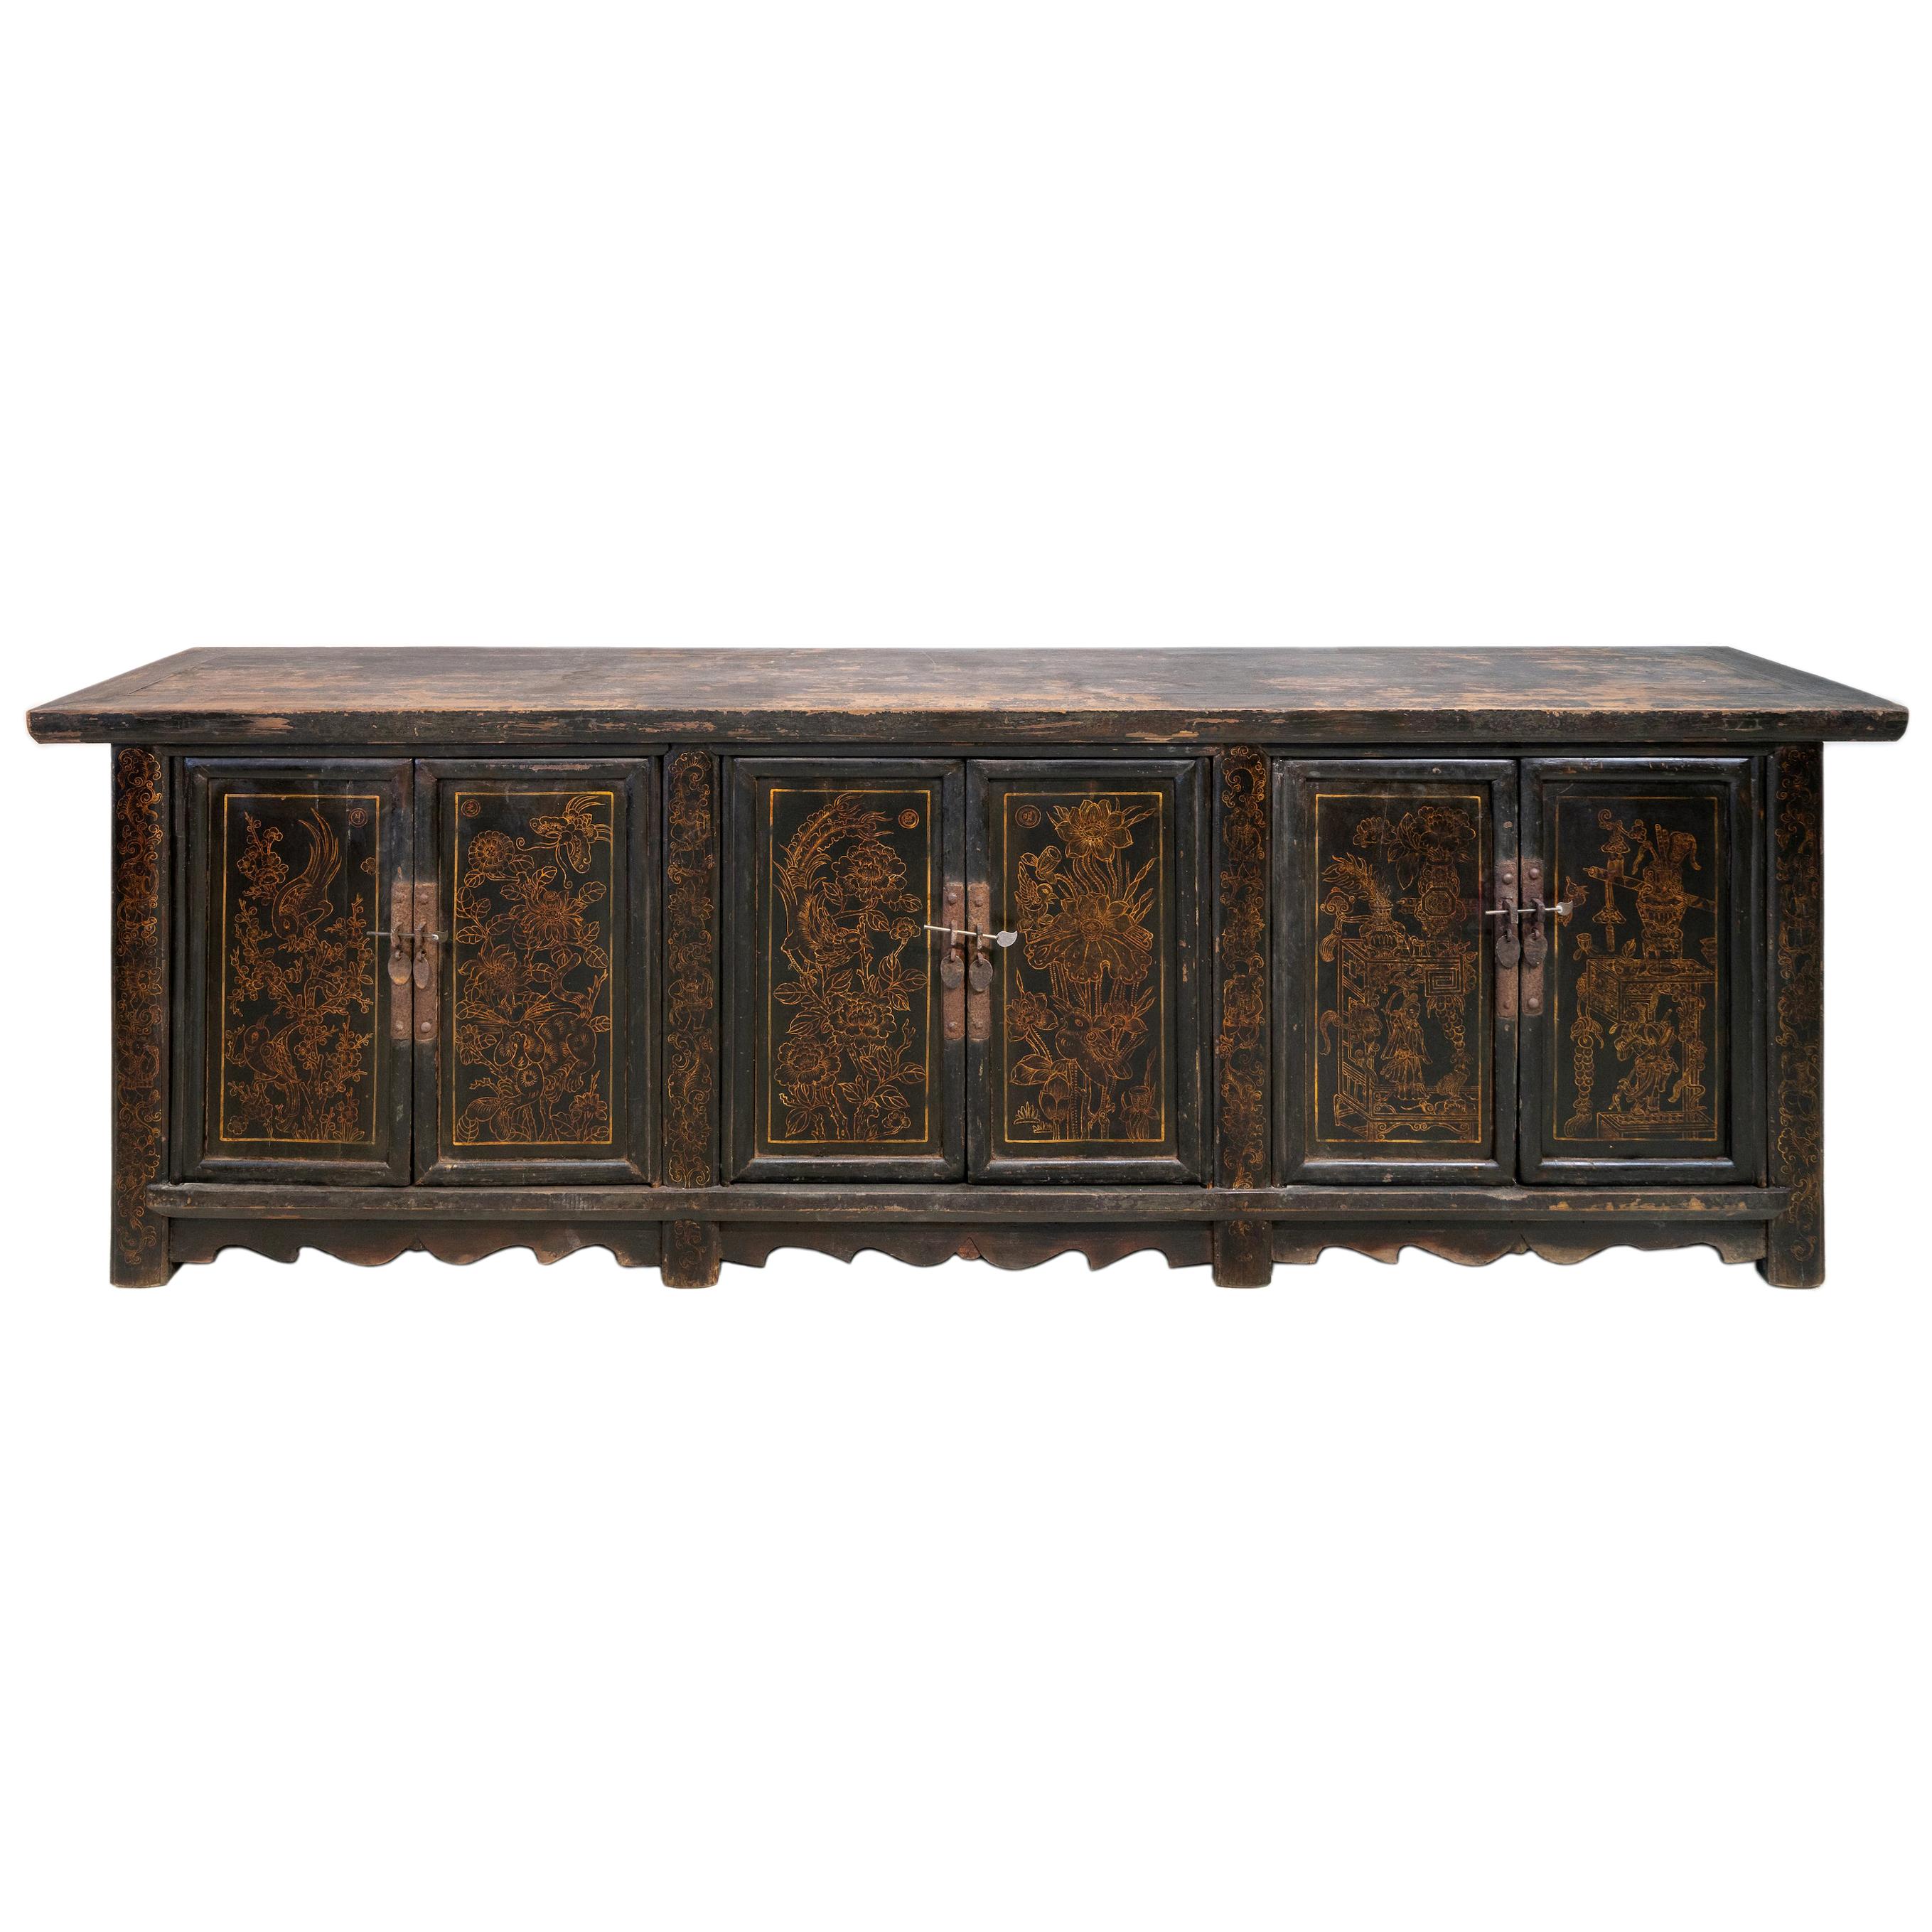 Late 19th Century Long Black Lacquered Sideboard from Shanxi, China